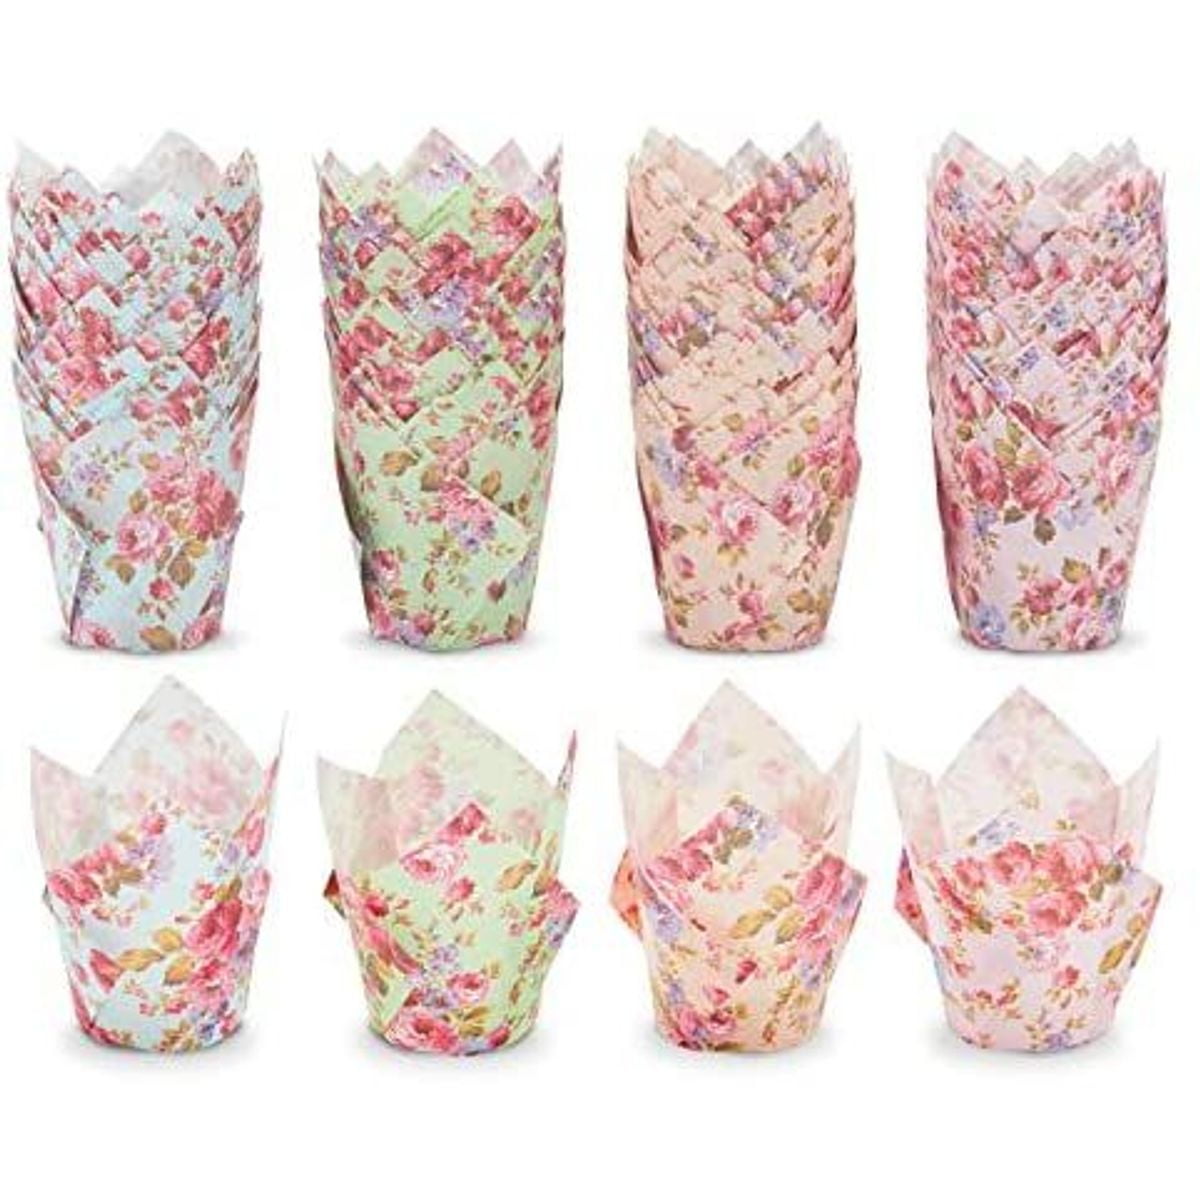 White Tulip Wraps with Floral Design x 24 by Yolli Floral Pattern Cupcake Cases